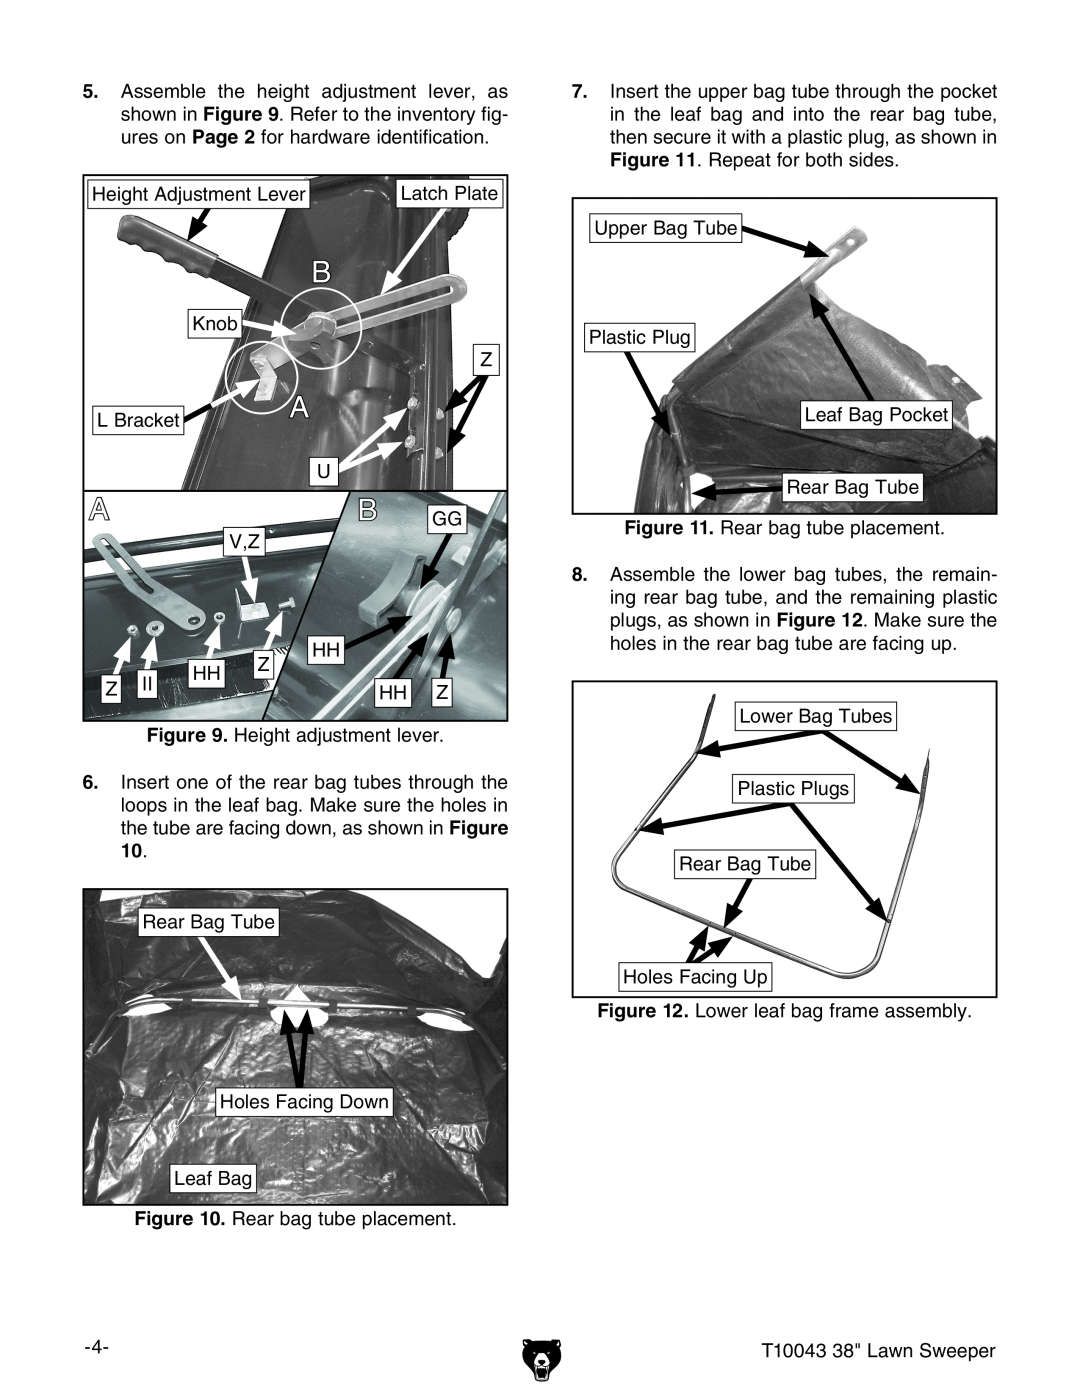 Grizzly T10043 instruction sheet 